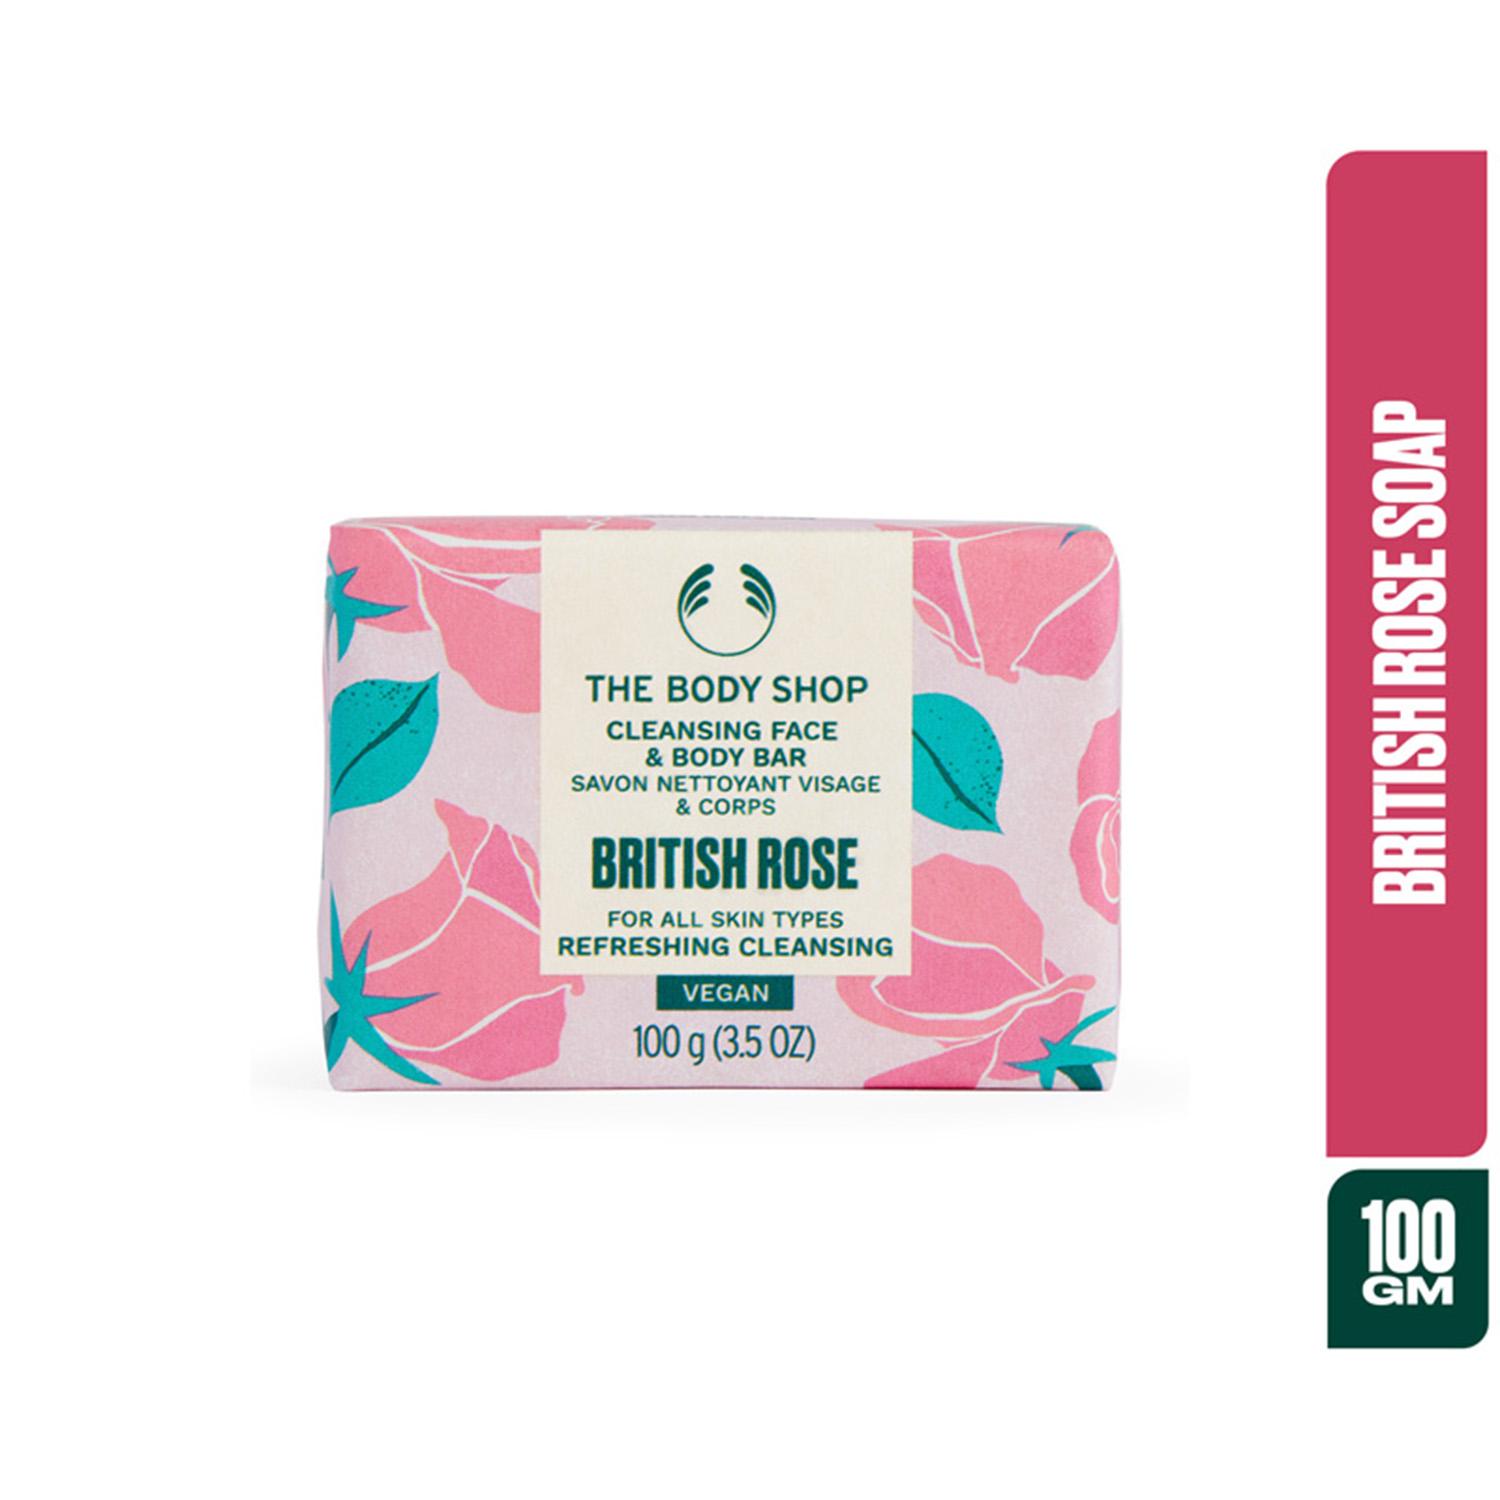 The Body Shop | The Body Shop British Rose Cleansing Face & Body Bar (100g)